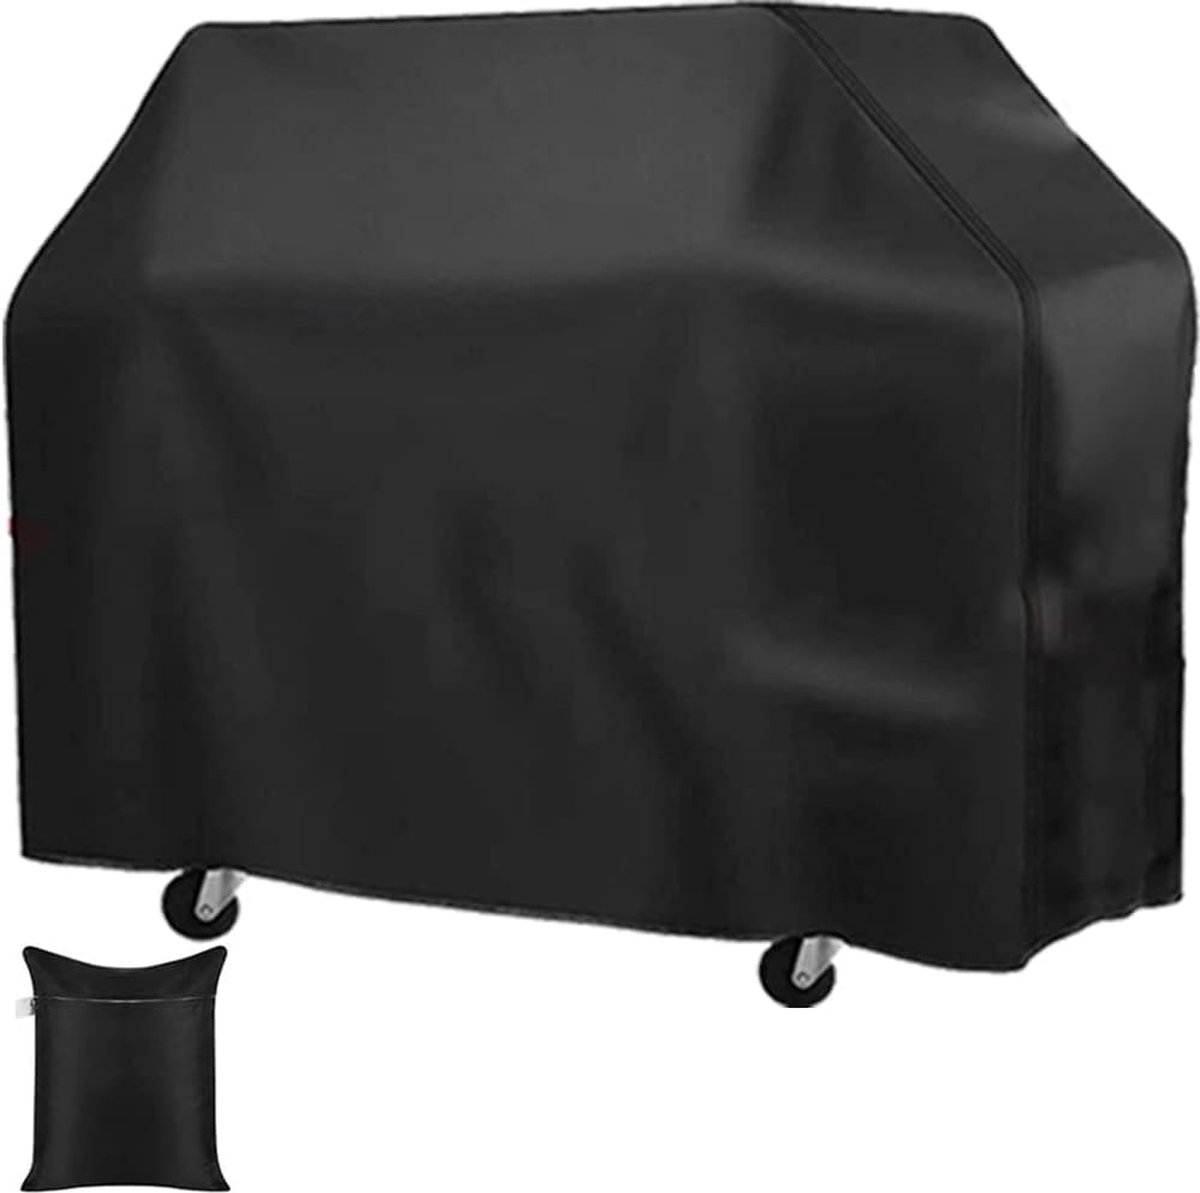 Gas Grill Barbecue Cover Skyour Waterdichte BBQ Gas Grill Roker Cover Weerbestendig UV Heavy Duty Patio Outdoor Gas Barbecue BBQ Grill Covers (L: 57x24x46